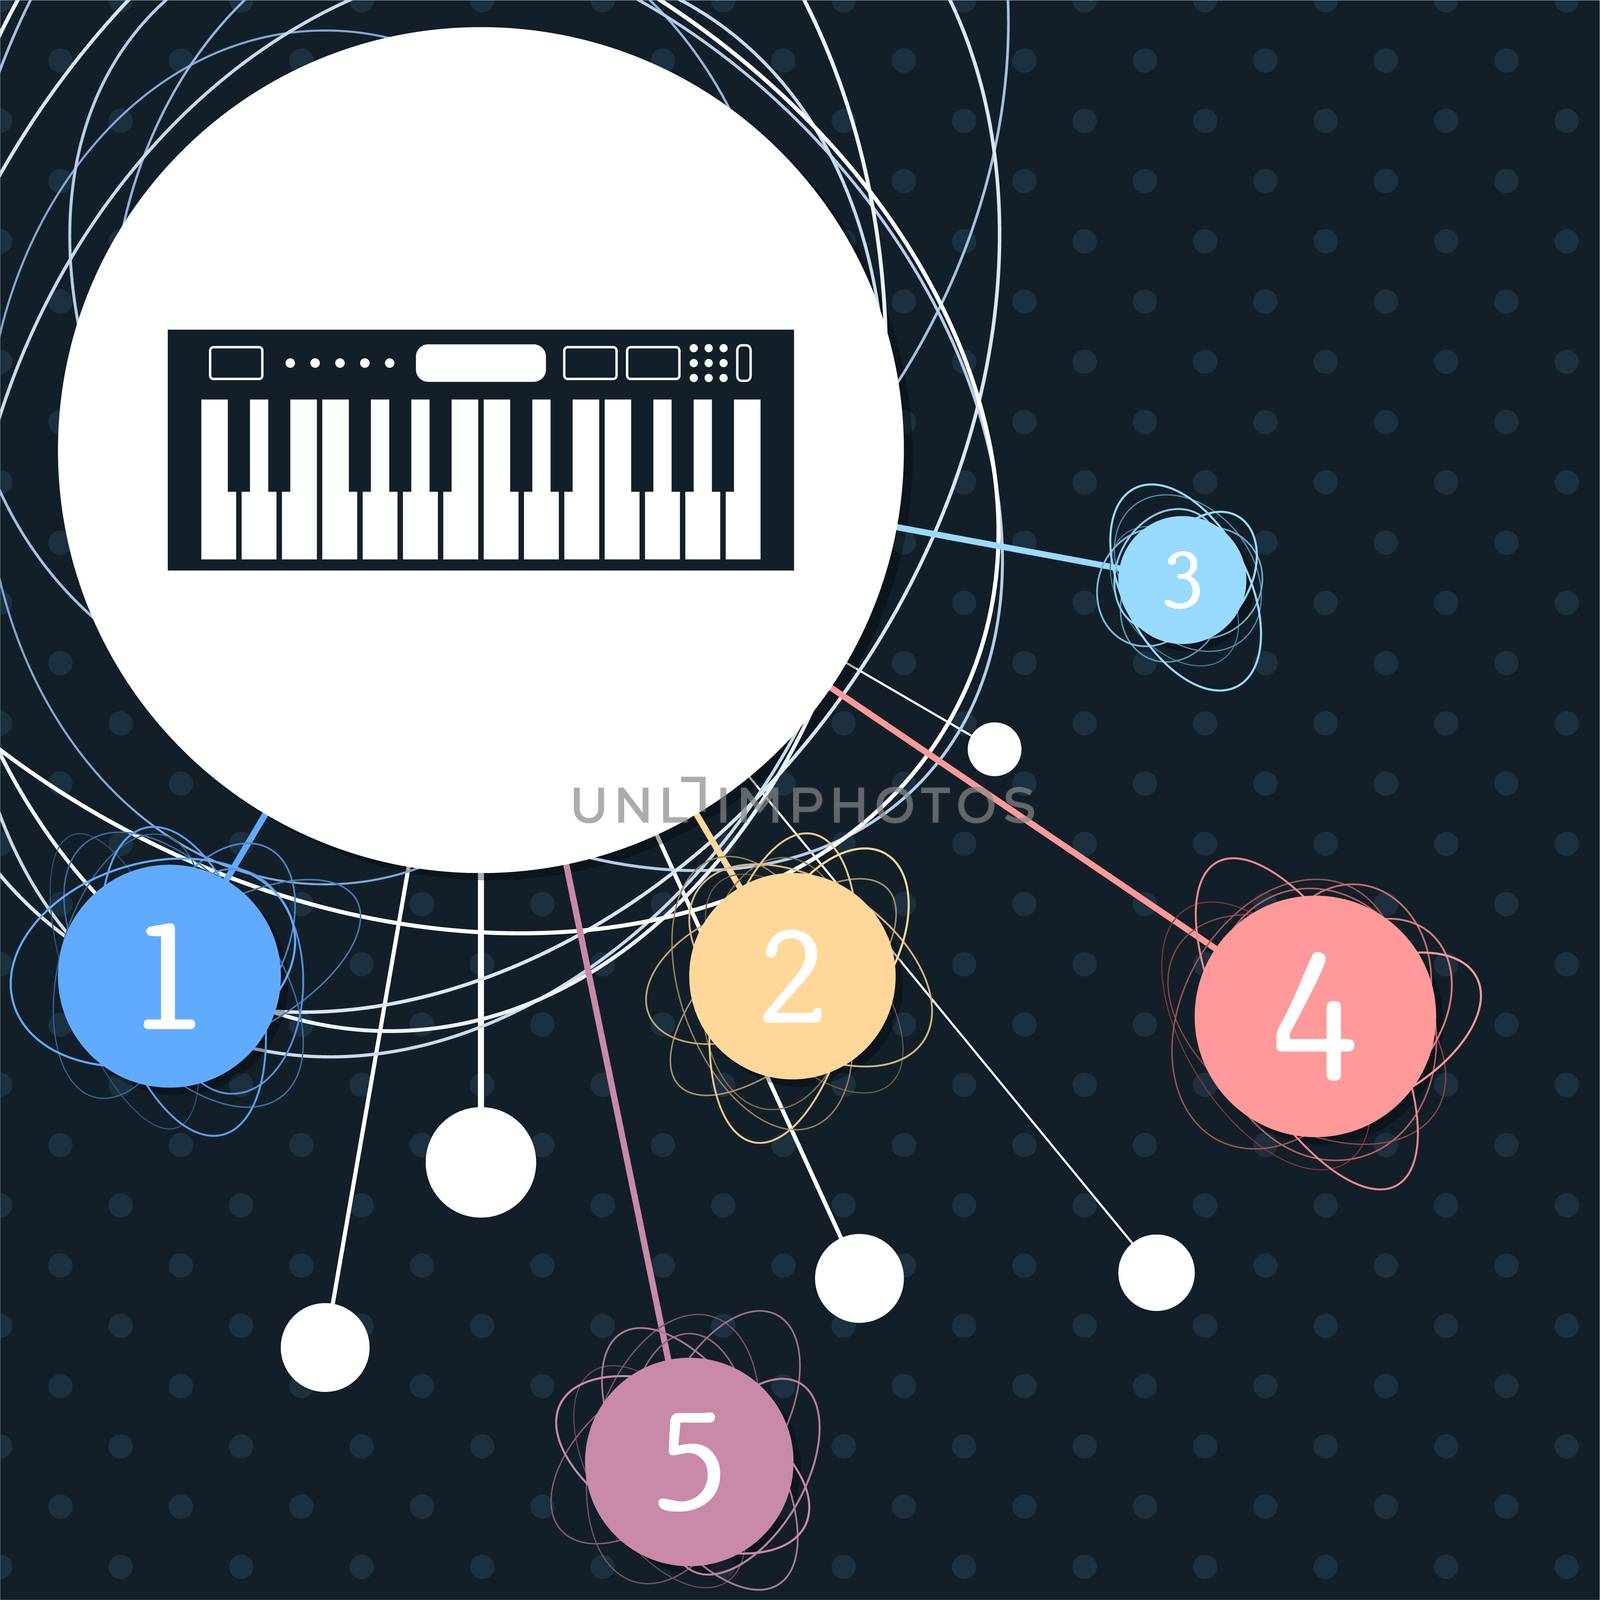 synthesizer icon with the background to the point and with infographic style. illustration